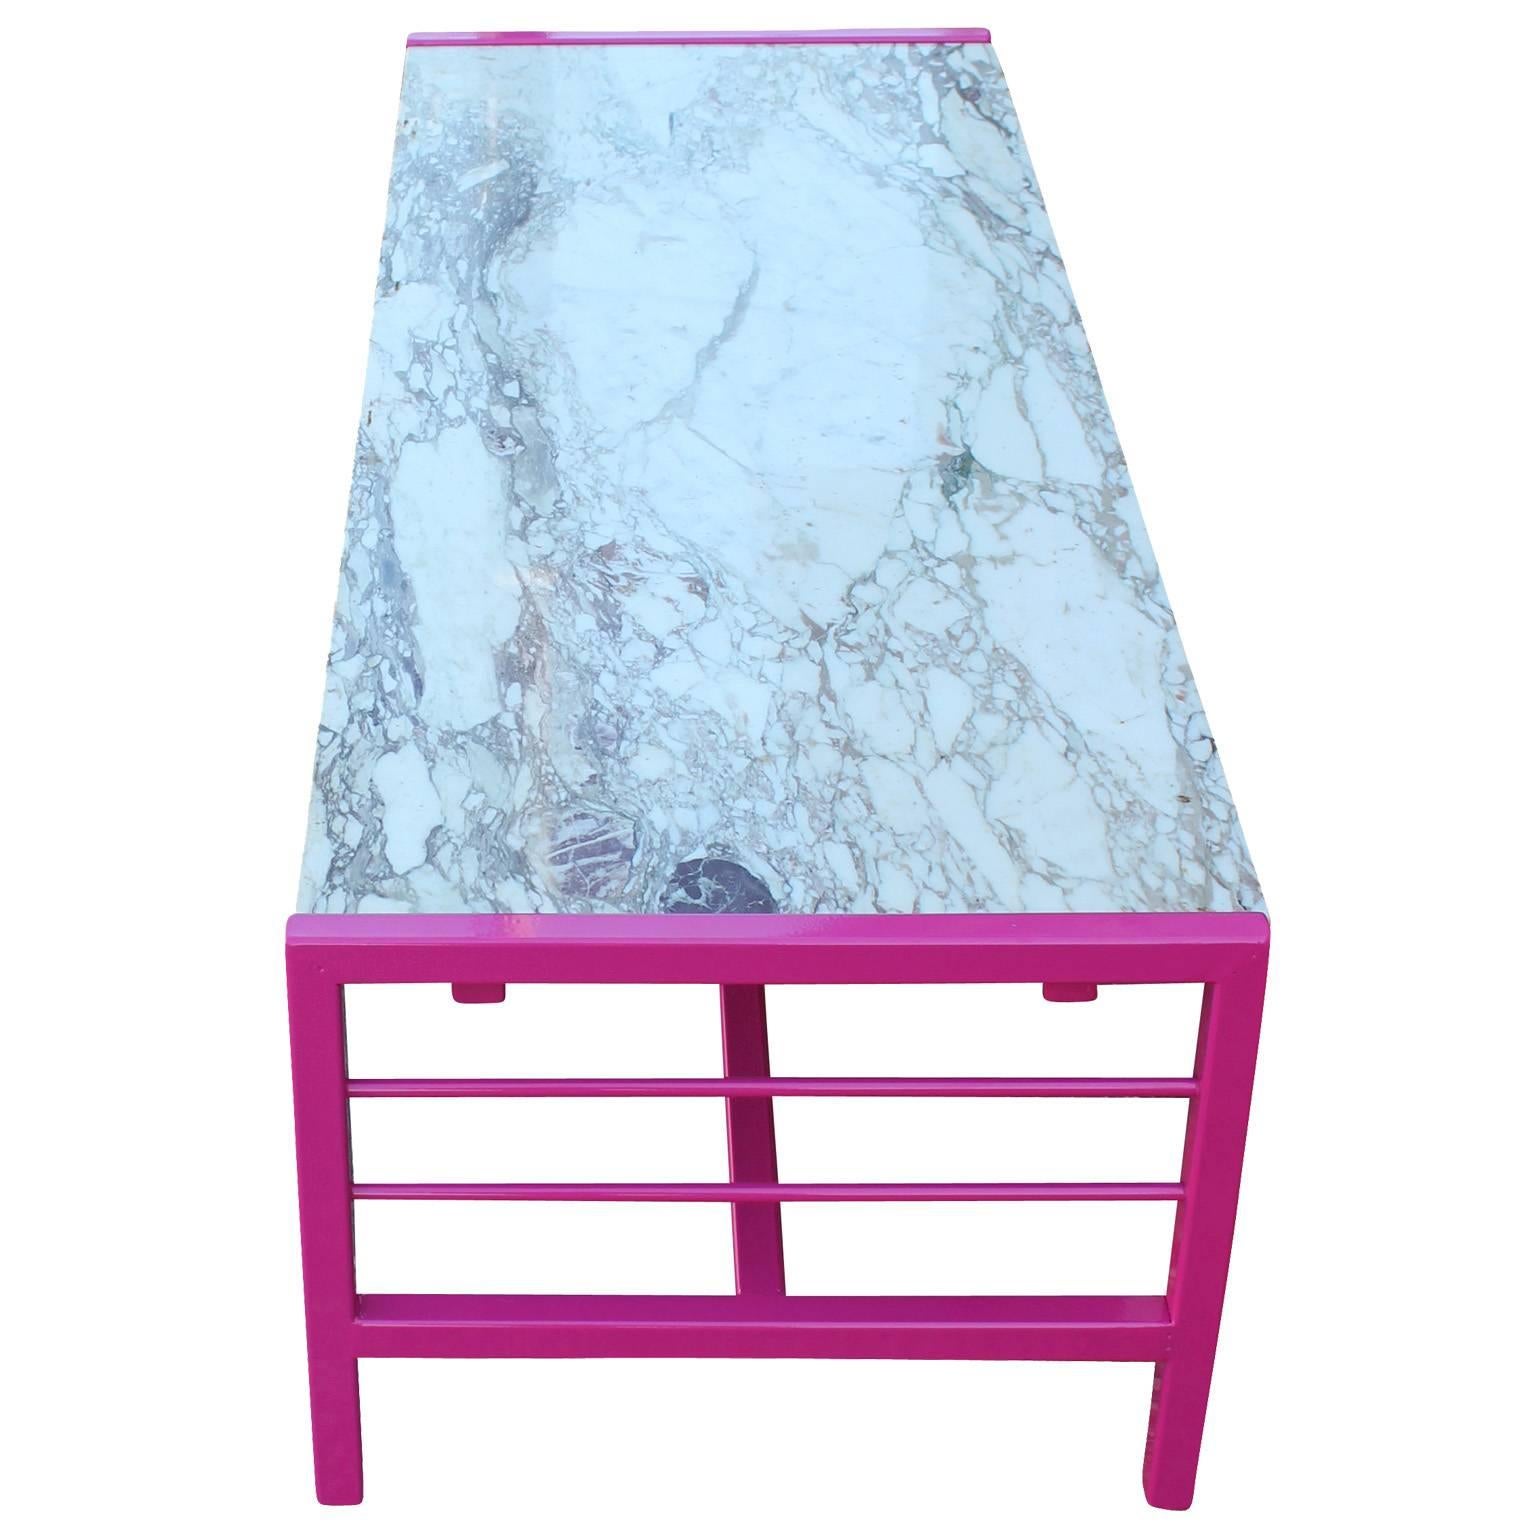 Excellent clean lined Carrara marble topped rectangular coffee table. Table frame is powder coated in a bold pink. Adds a nice pop of color to any space.